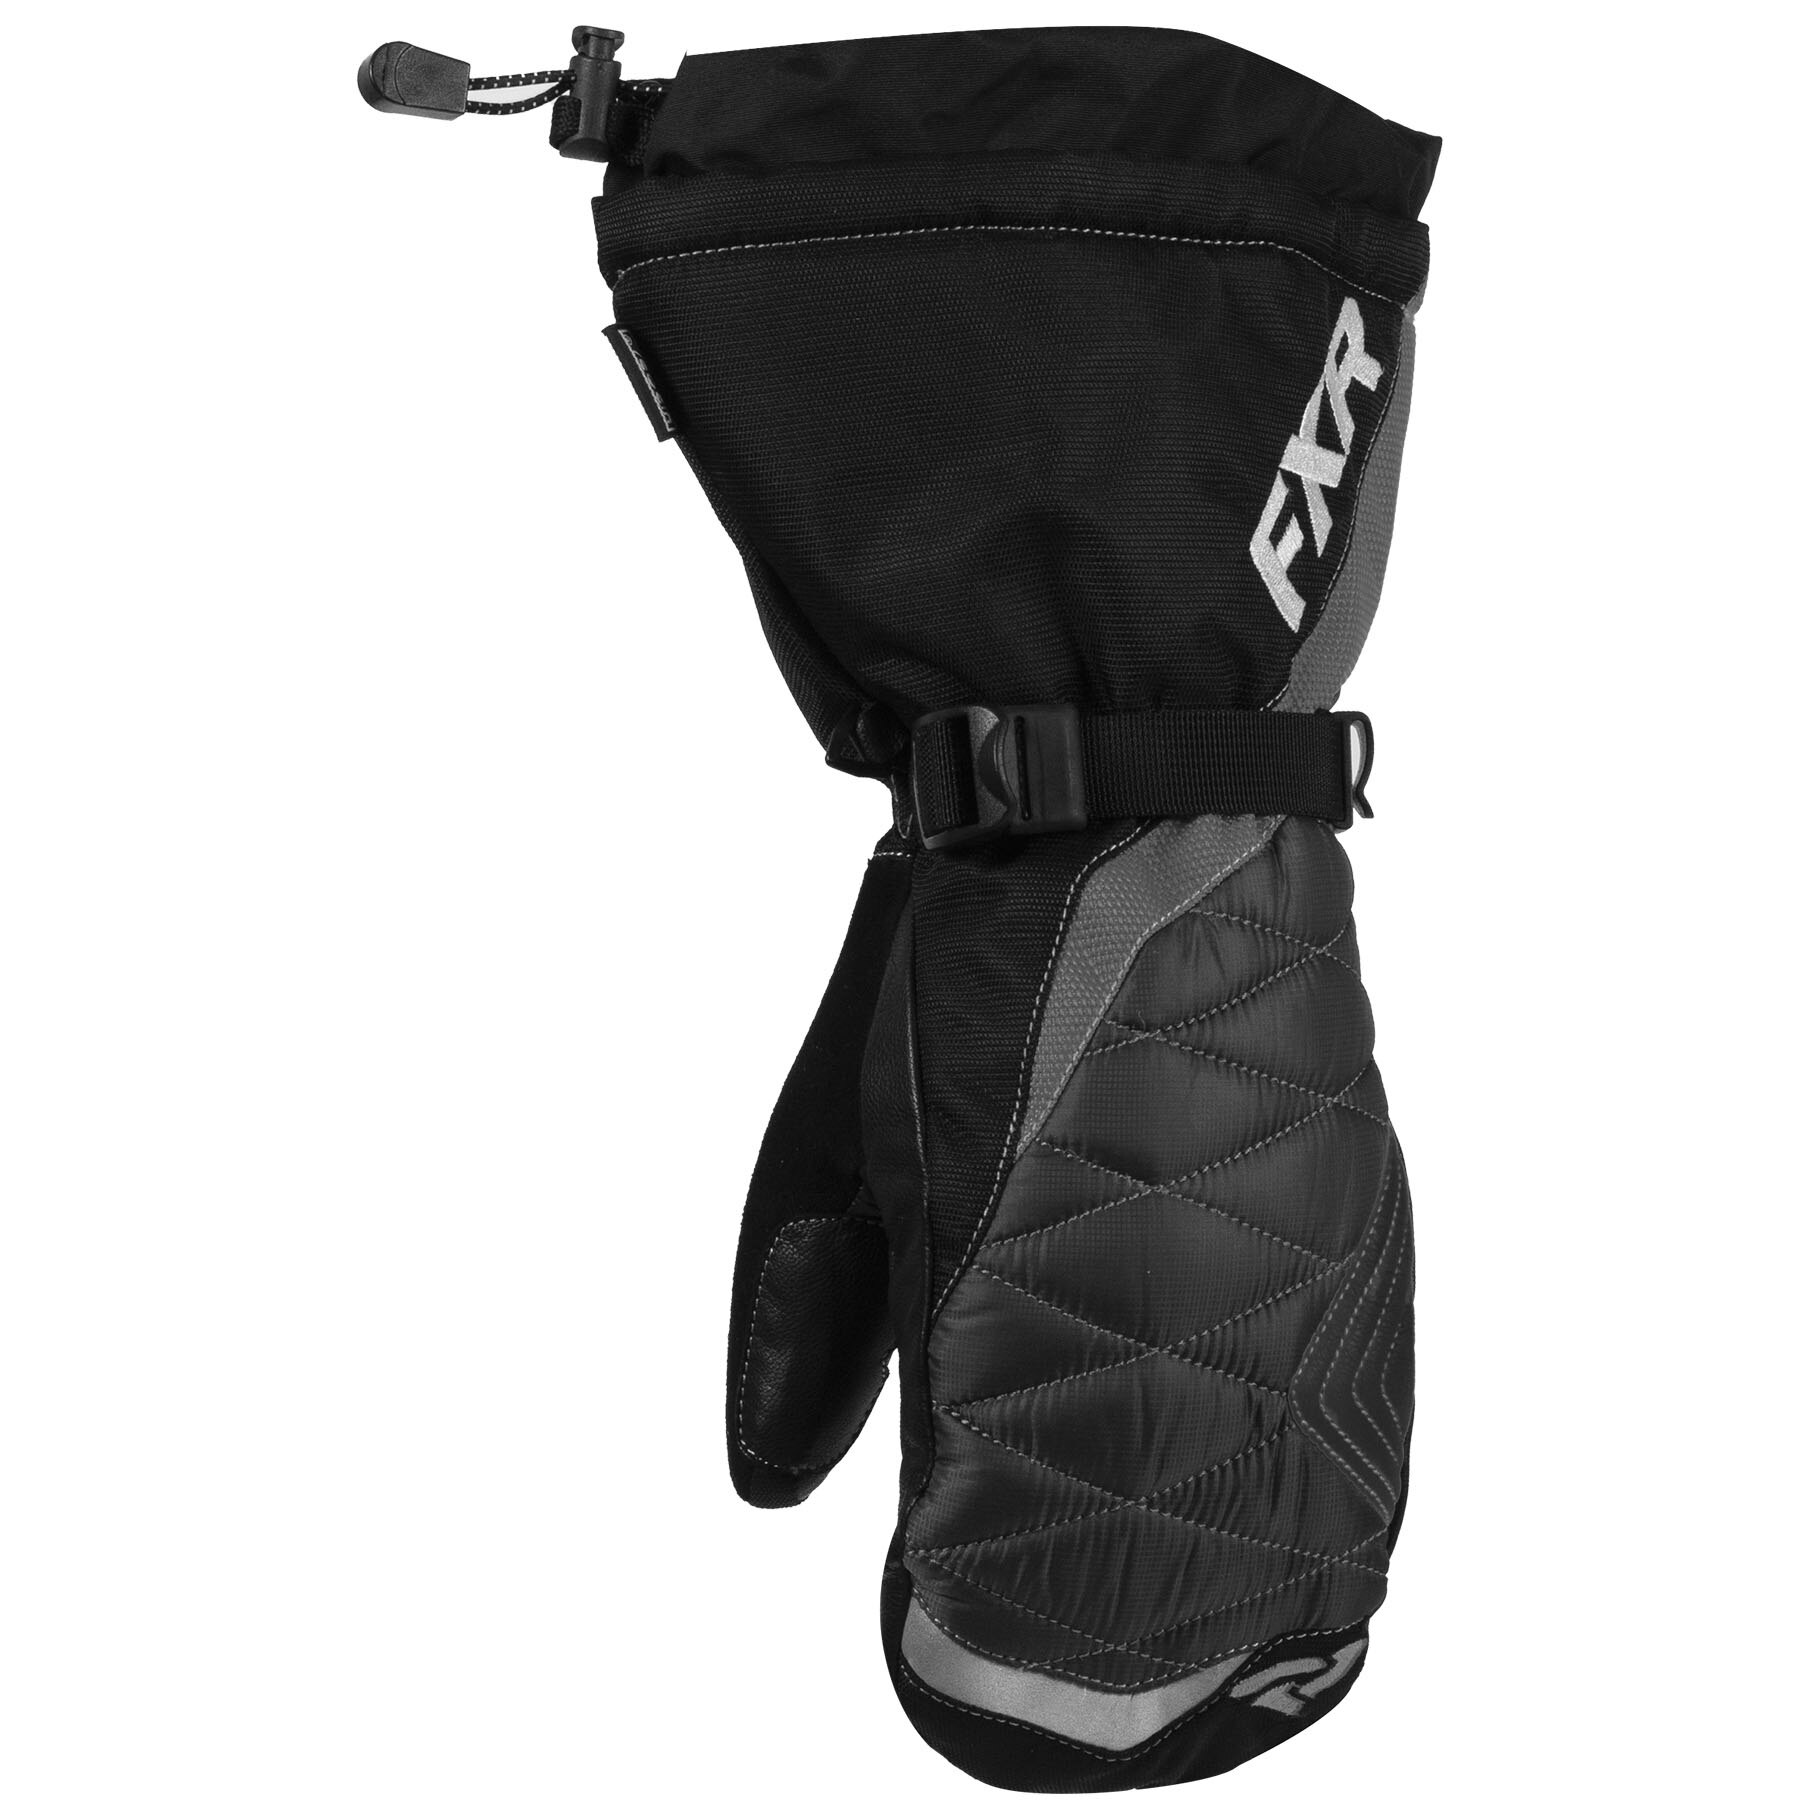 Women's FXR® Fusion Mitts Extra Large black/charcoal